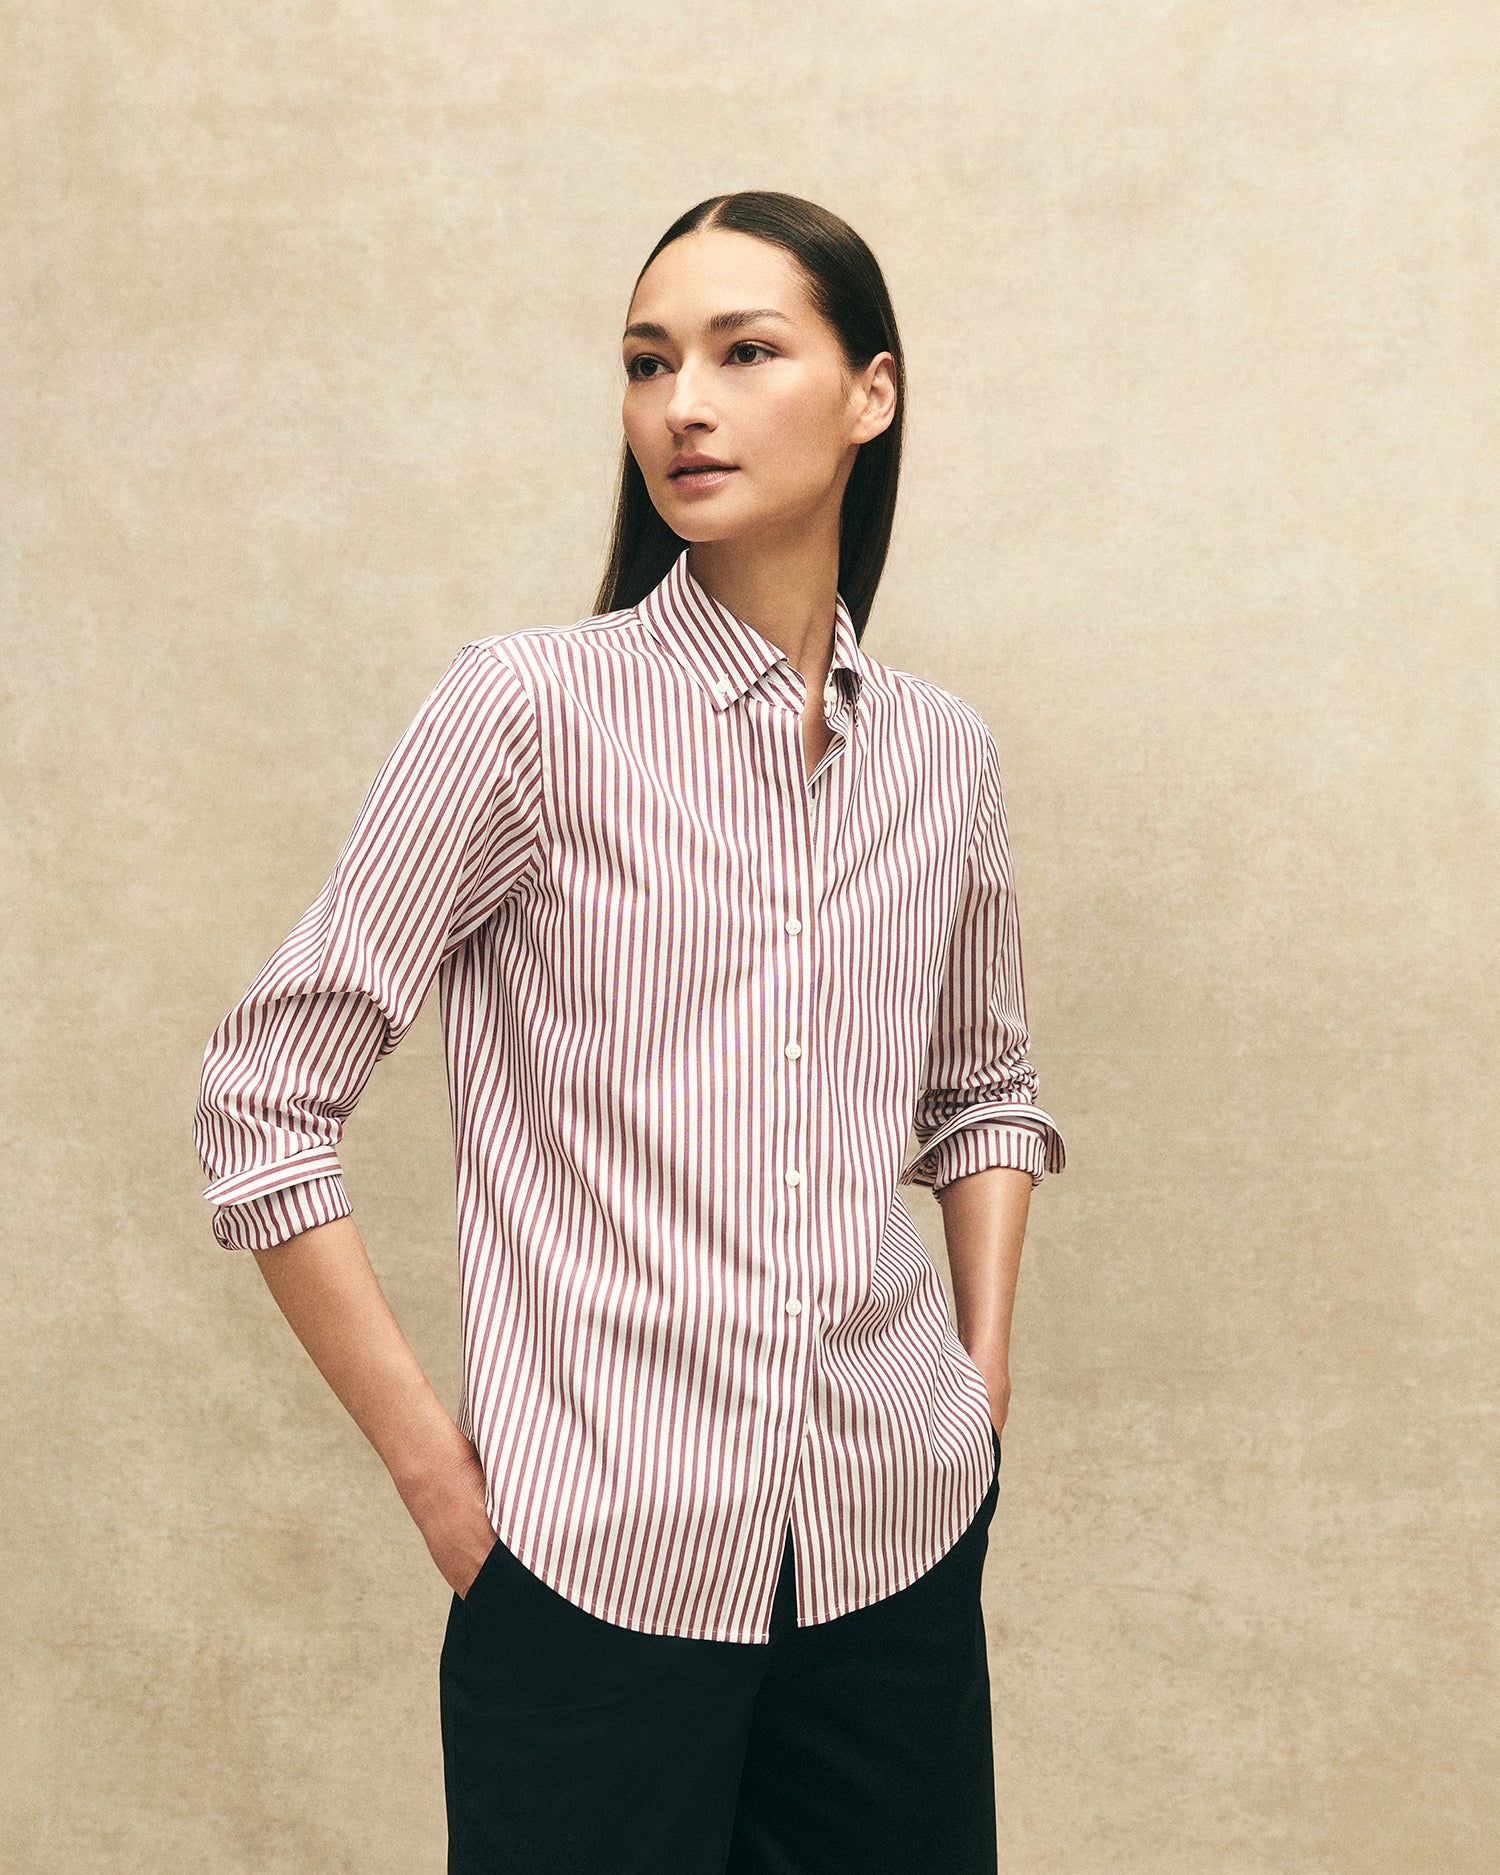 Collared Shirts for Women - Up to 80% off